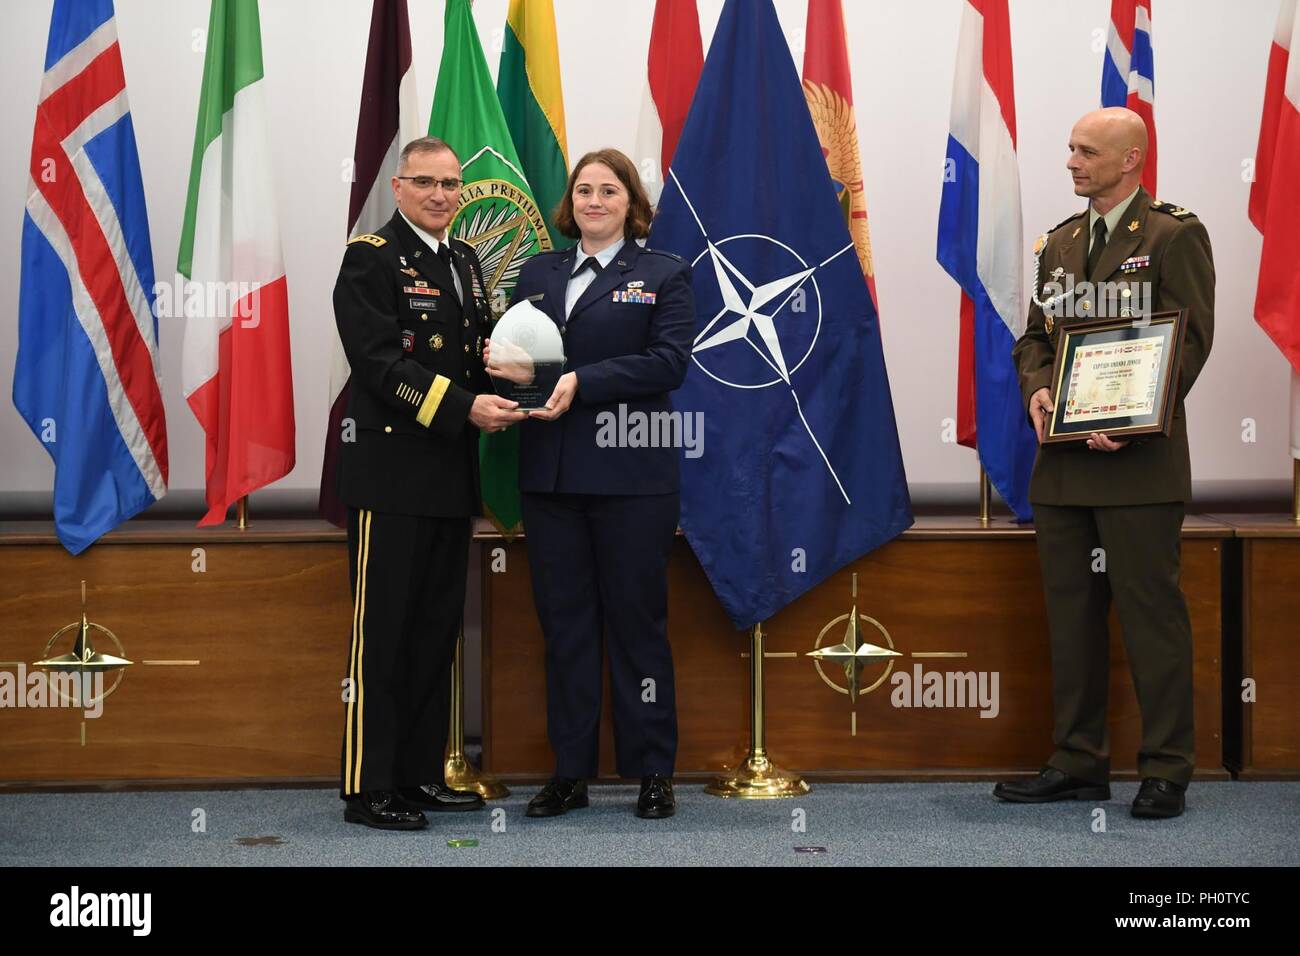 upreme Allied Commander Europe (SACEUR), General Curtis M. Scaparrotti, and Command Senior Enlisted Leader (CSEL), Command Sergeant Major Davor Petek, present U.S. Air Force Captain Amanda Zenner with the ACO Military Member of the Year Award on Thursday, June 21, 2018 at Allied Joint Force Command Naples. Stock Photo